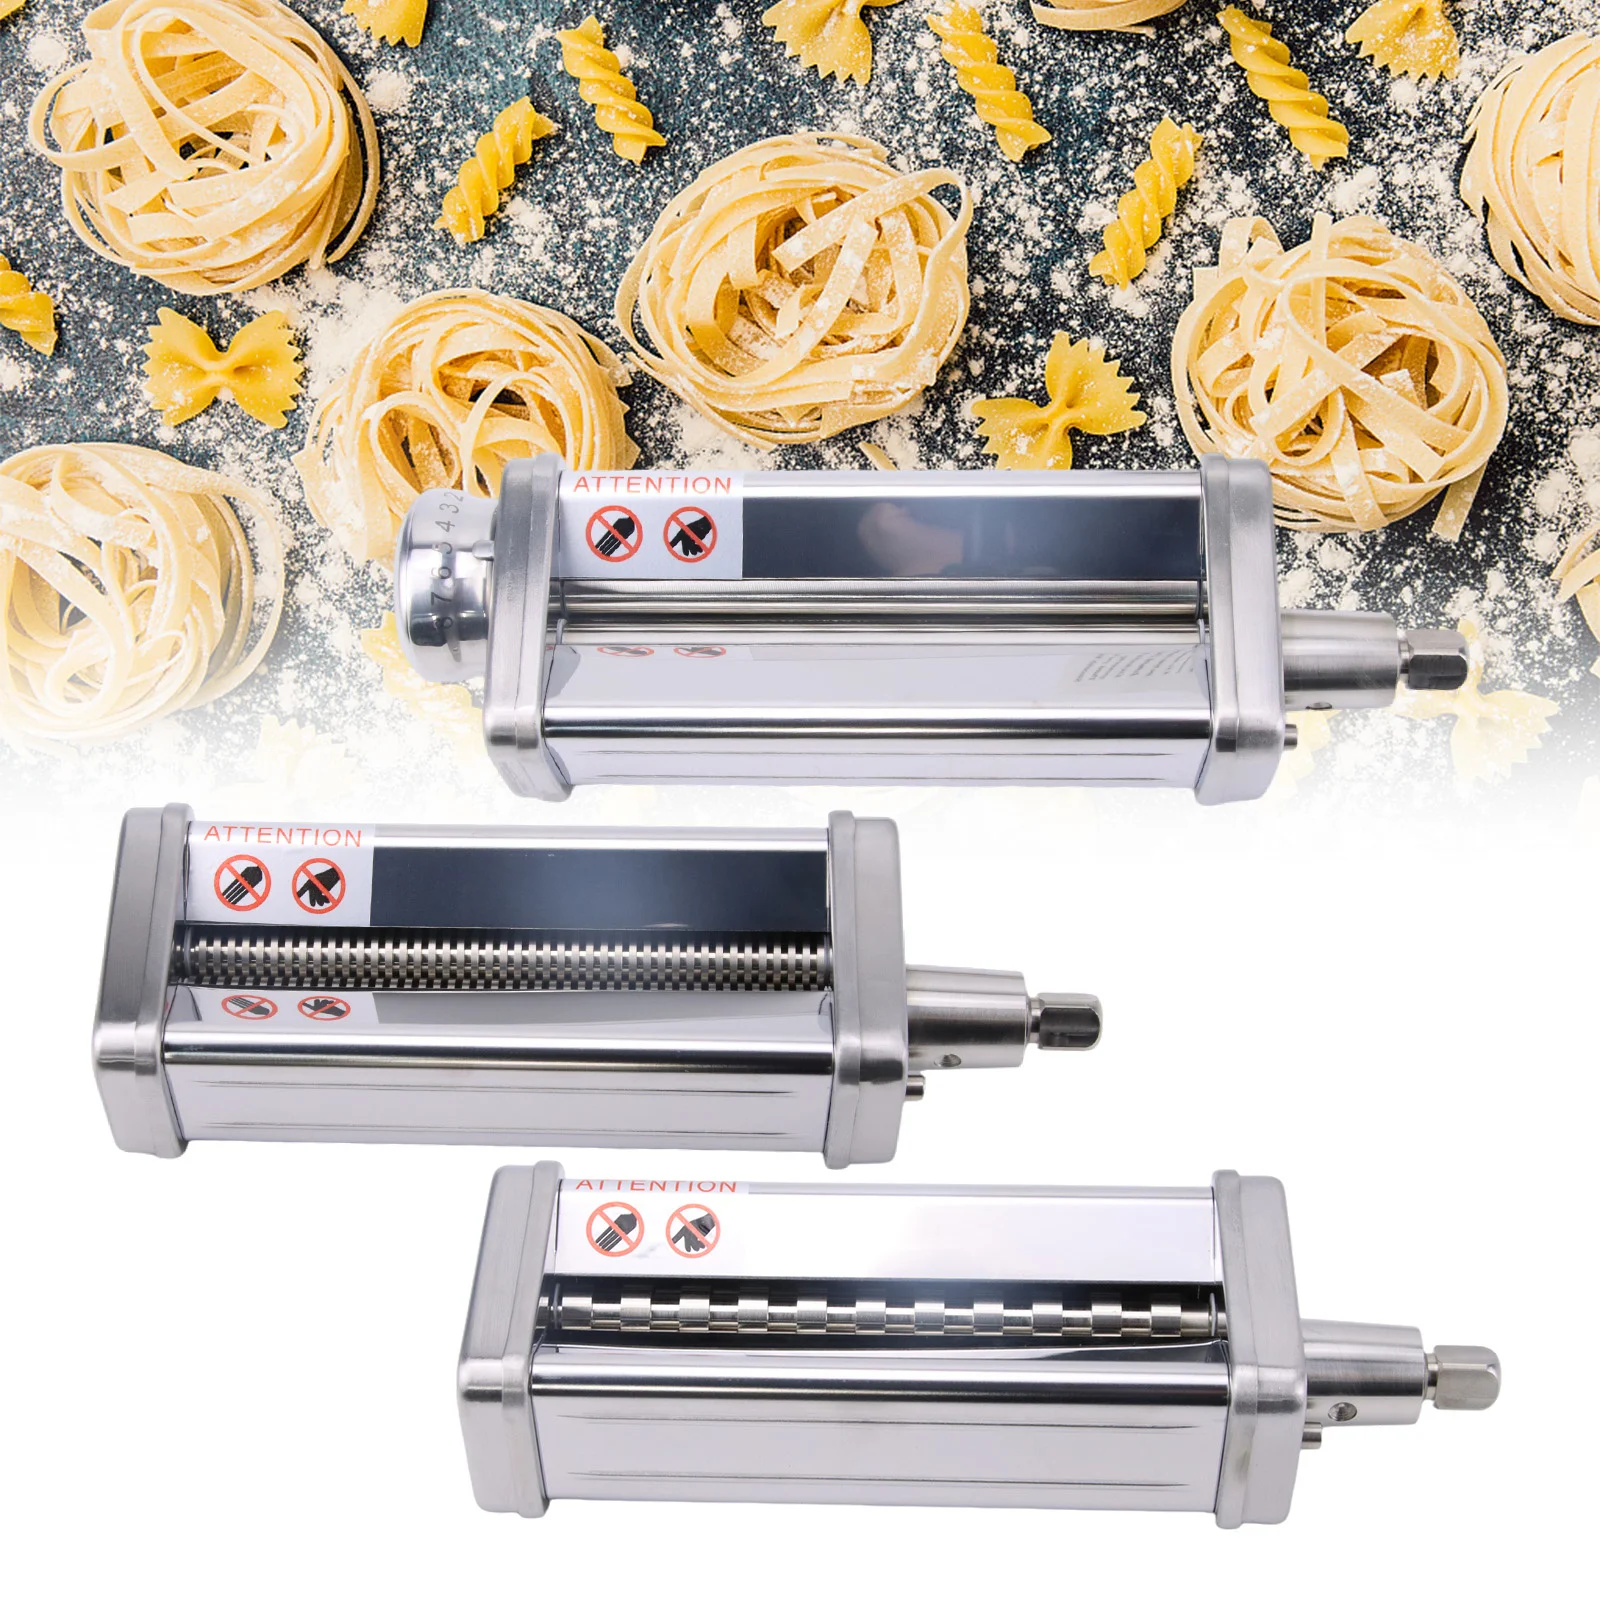 https://ae01.alicdn.com/kf/S2b457a12d77d4f0dac7cda5baec7ac54T/Noodle-Makers-Parts-For-Kitchenaid-Fettucine-Cutter-Roller-Attachment-For-Stand-Mixers-Kitchen-Aid-Pasta-Food.jpg